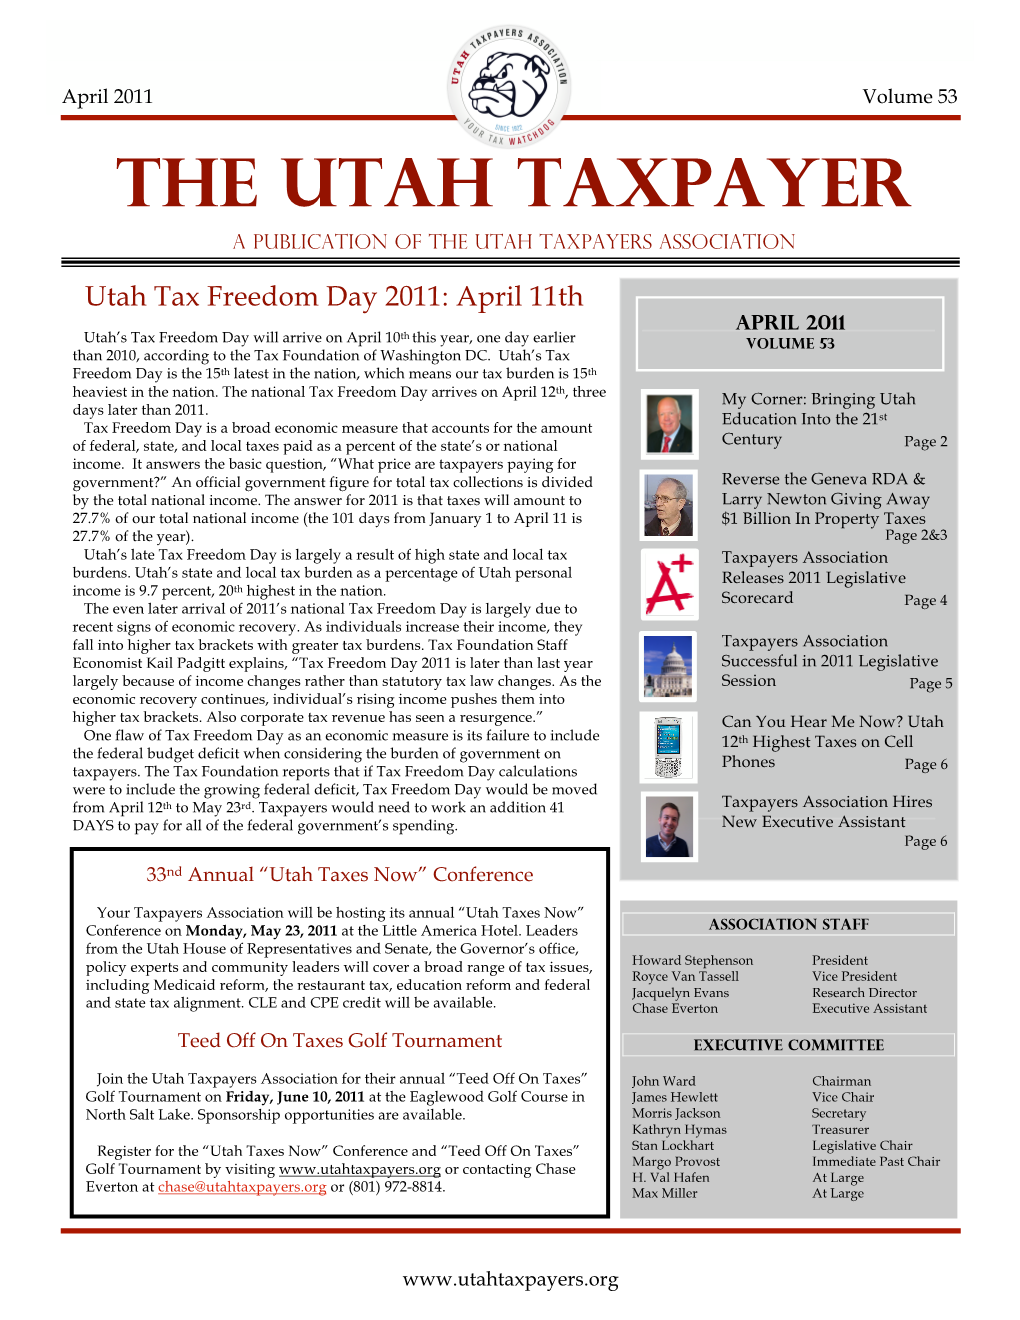 THE UTAH TAXPAYER a Publication of the Utah Taxpayers Association